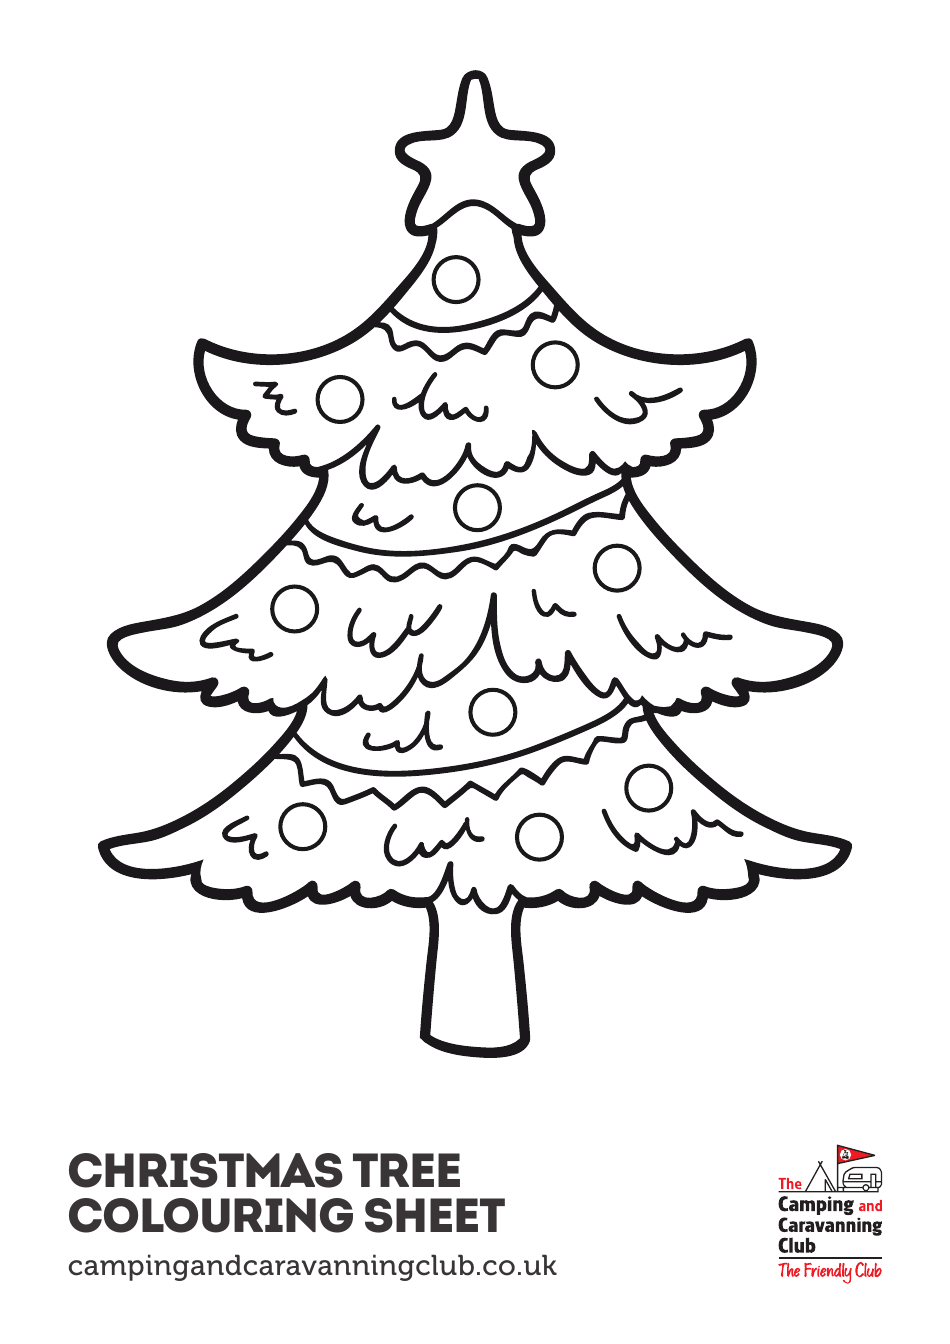 Doodle Christmas Tree Coloring Page Download Printable PDF | Templateroller